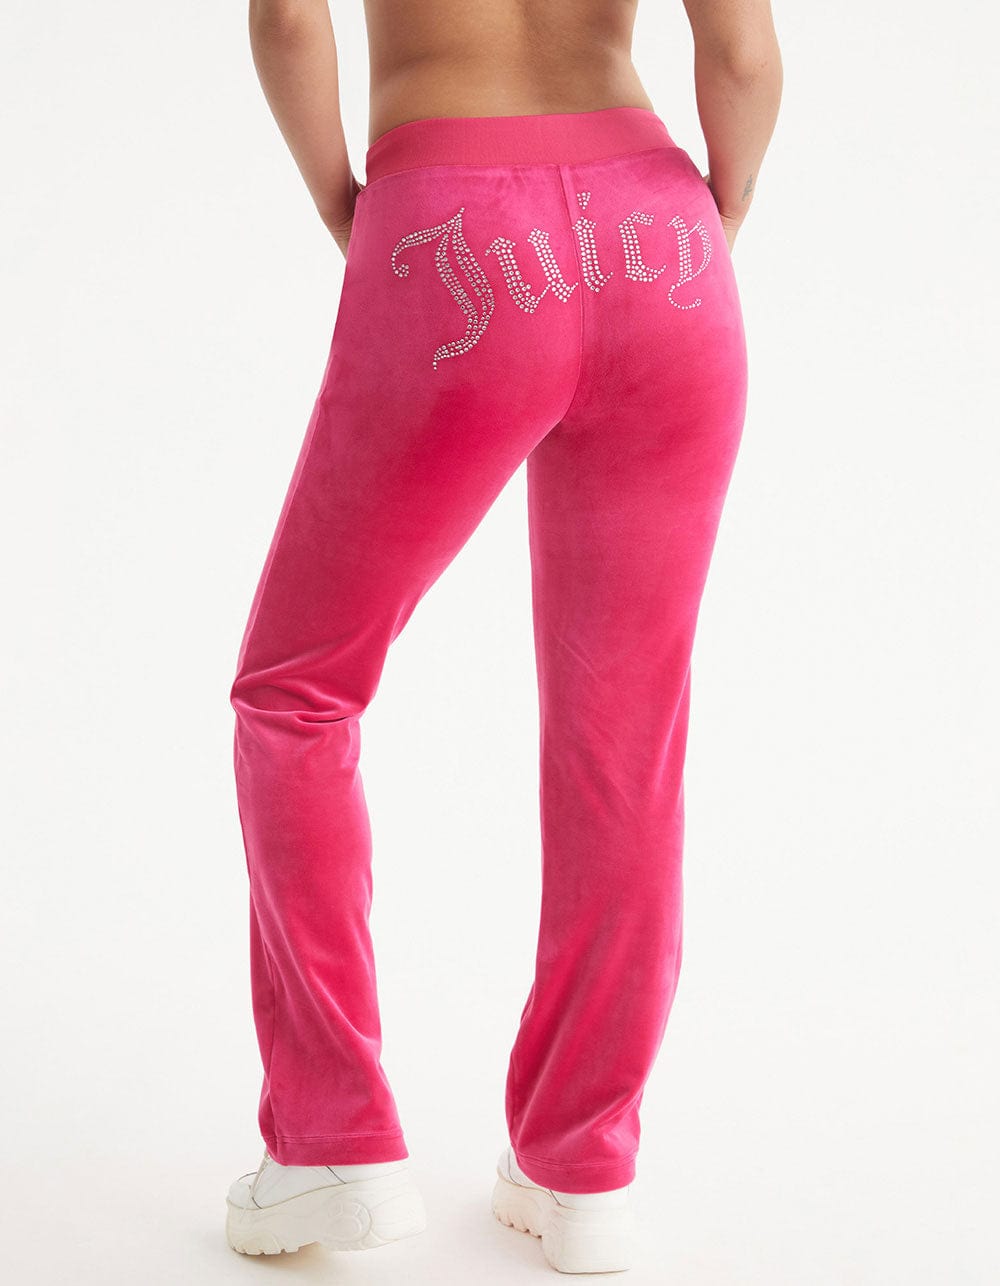 JUICY COUTURE JUICY COUTURE -  OG Big Bling Women's Velour Track Pants